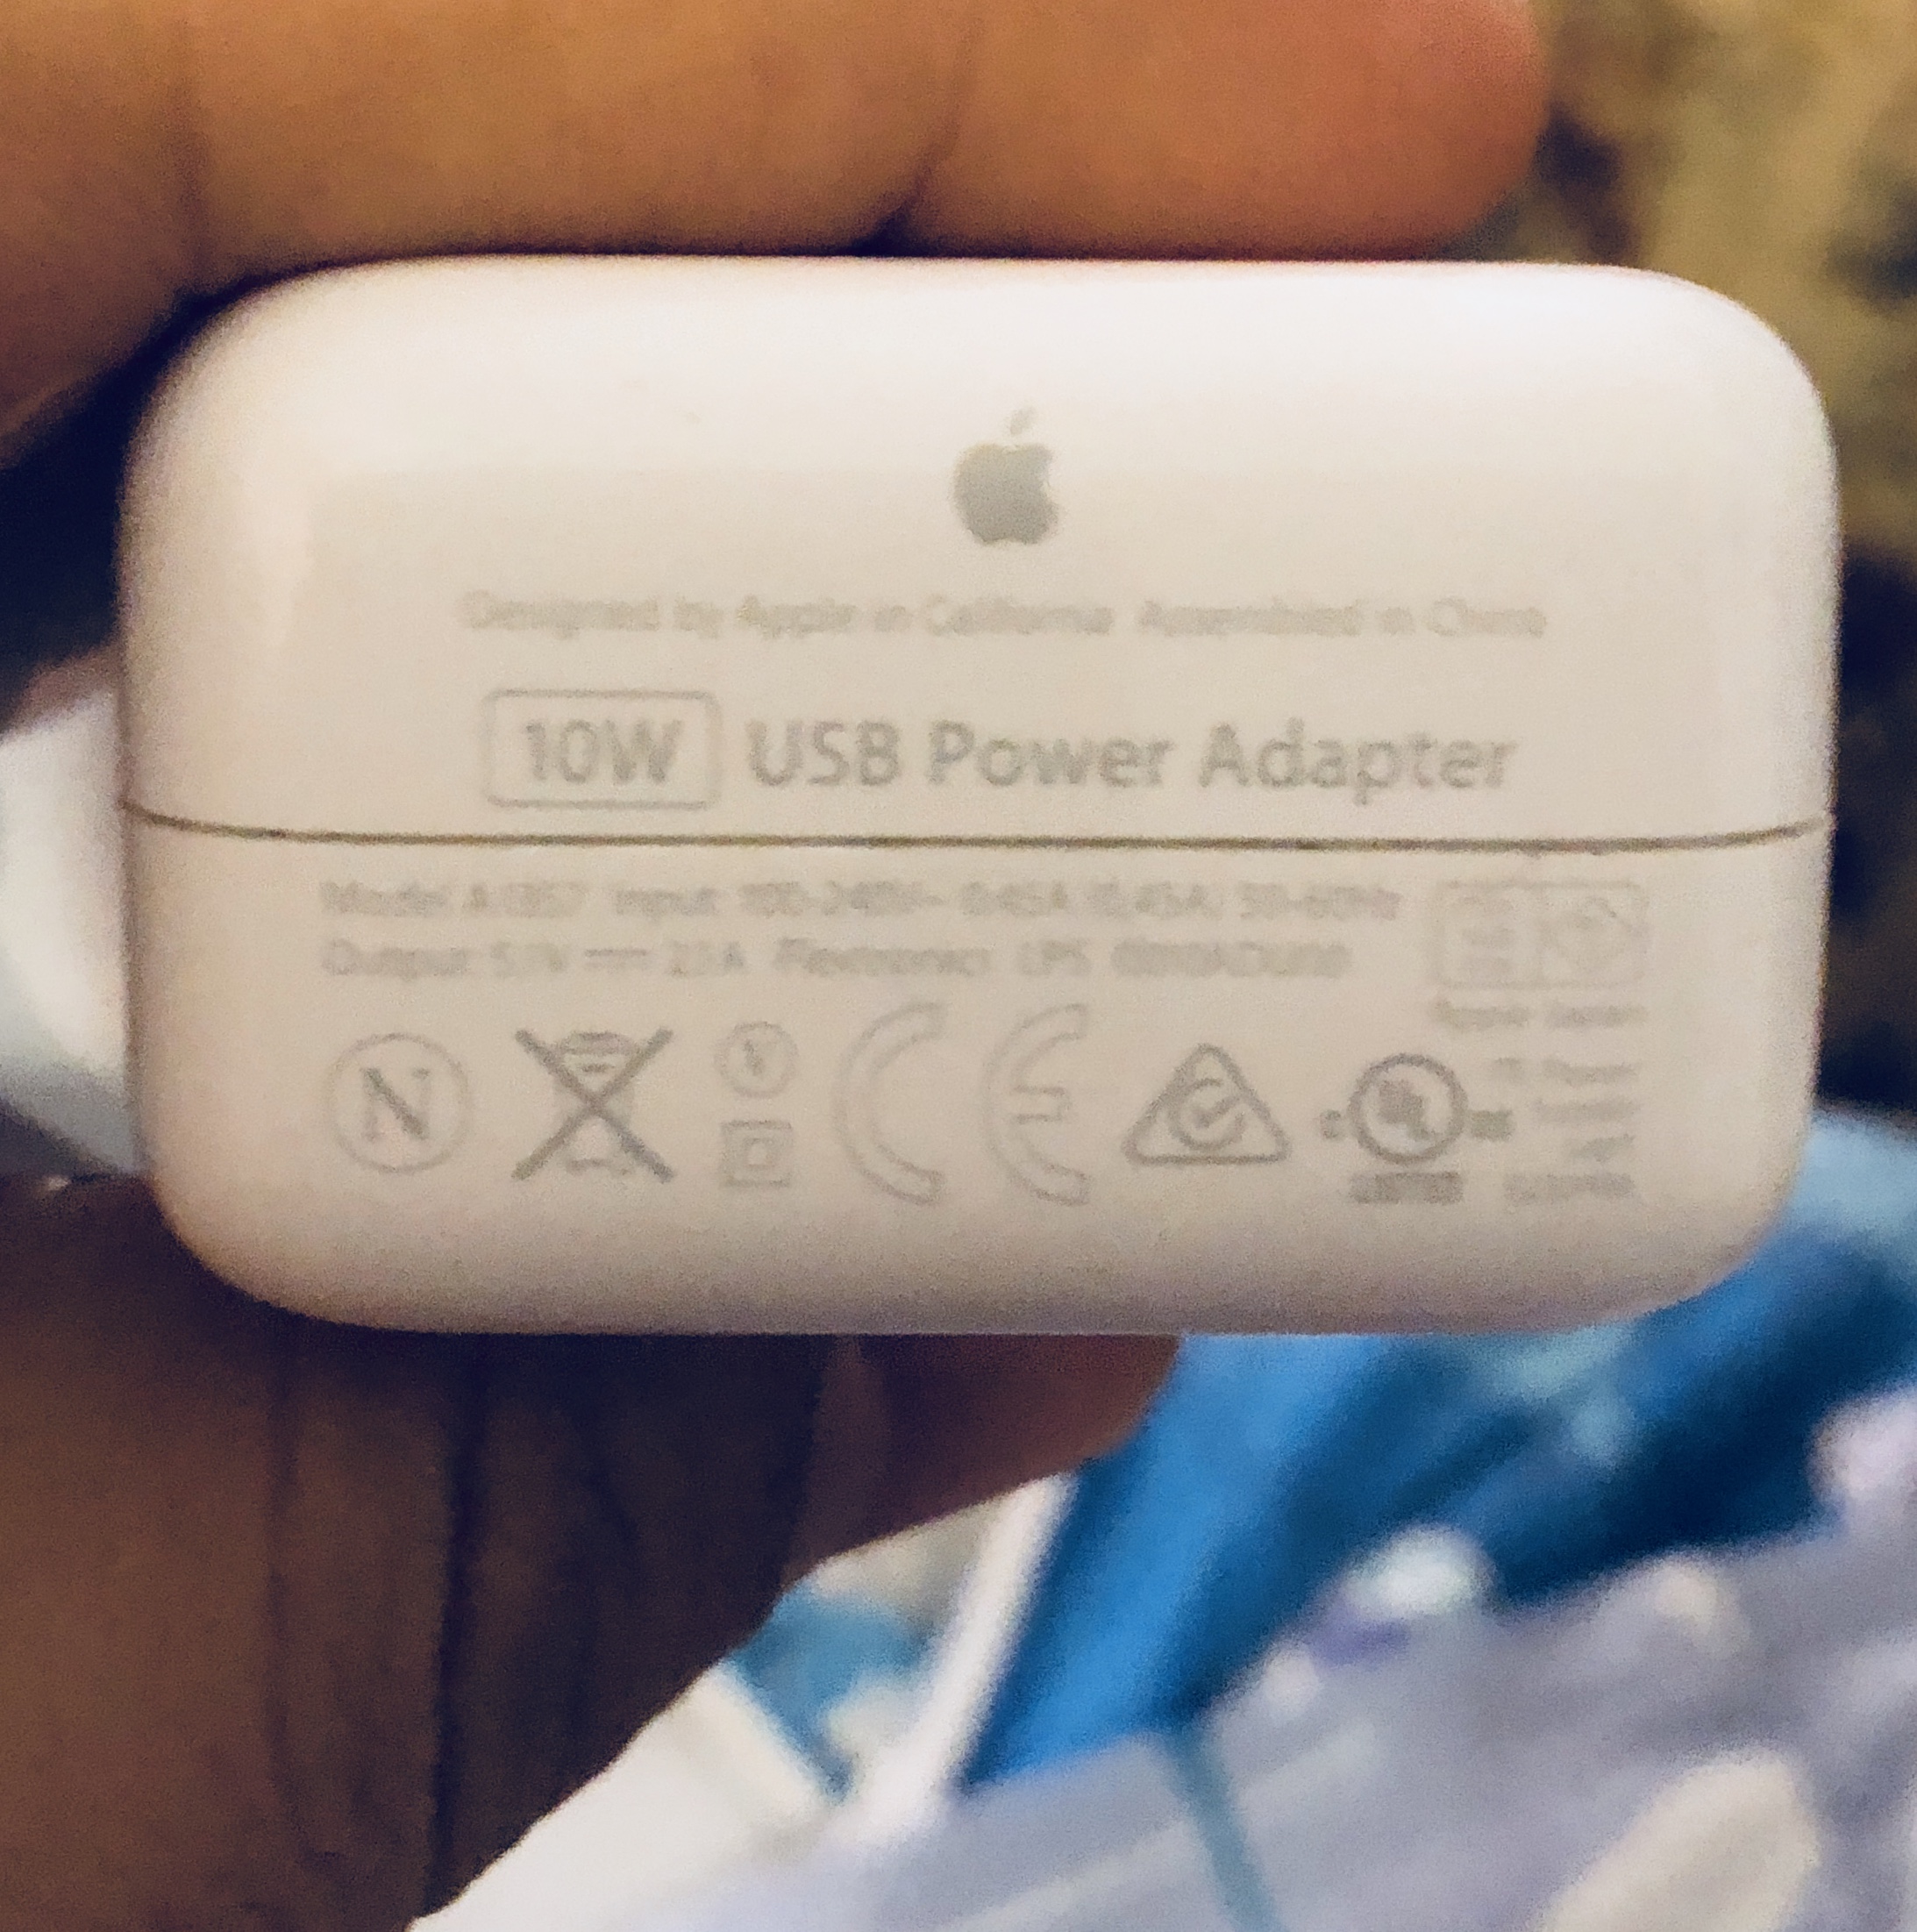 How tell if 10w power is - Apple Community